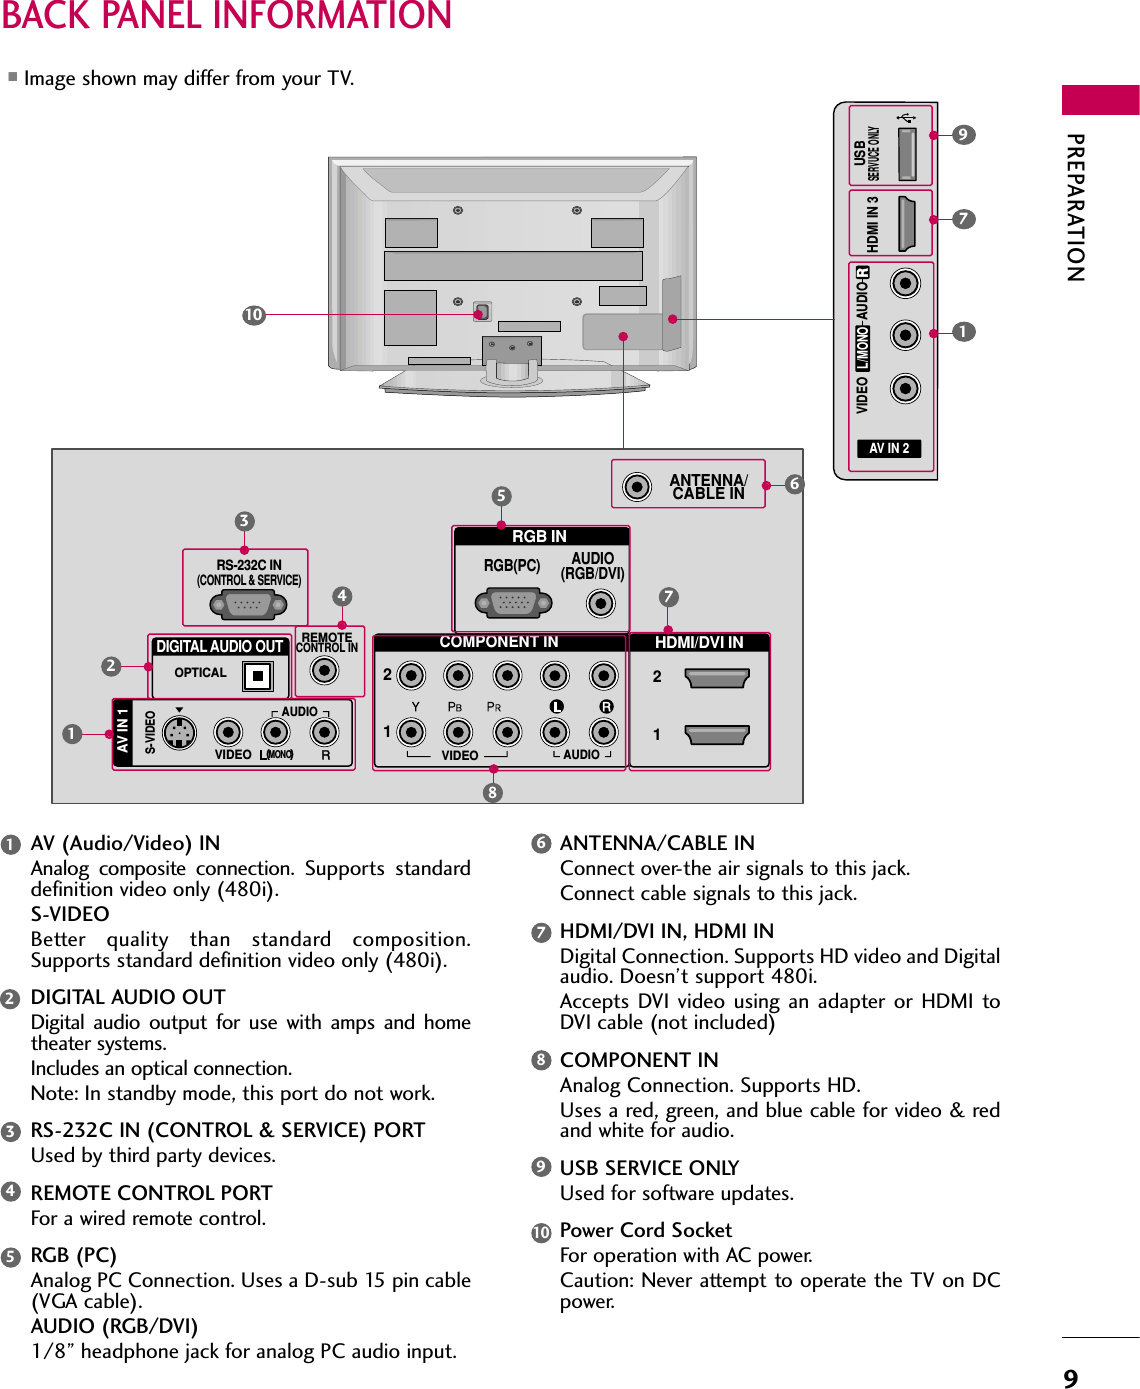 PREPARATION9BACK PANEL INFORMATION■Image shown may differ from your TV.(            )AV IN 2L/MONORAUDIOVIDEOUSBSERVUCE ONLYHDMI IN 3RGB INCOMPONENT INAUDIO(RGB/DVI)RGB(PC)REMOTECONTROL INANTENNA/CABLE IN12RS-232C IN(CONTROL &amp; SERVICE)VIDEOAUDIOAUDIOOPTICALDIGITAL AUDIO OUTAV IN 1HDMI/DVI IN 21VIDEOMONO(            )S-VIDEOR(            )R7534621817AV (Audio/Video) INAnalog  composite  connection. Supports  standarddefinition video only (480i).S-VIDEOBetter  quality  than  standard  composition.Supports standard definition video only (480i).DIGITAL AUDIO OUTDigital  audio  output  for  use  with  amps  and  hometheater systems. Includes an optical connection.Note: In standby mode, this port do not work.RS-232C IN (CONTROL &amp; SERVICE) PORTUsed by third party devices.REMOTE CONTROL PORTFor a wired remote control.RGB (PC)Analog PC Connection. Uses a D-sub 15 pin cable(VGA cable).AUDIO (RGB/DVI)1/8” headphone jack for analog PC audio input.ANTENNA/CABLE INConnect over-the air signals to this jack.Connect cable signals to this jack.HDMI/DVI IN, HDMI INDigital Connection. Supports HD video and Digitalaudio. Doesn’t support 480i. Accepts  DVI  video  using  an  adapter  or  HDMI  toDVI cable (not included)COMPONENT INAnalog Connection. Supports HD. Uses a red, green, and blue cable for video &amp; redand white for audio.USB SERVICE ONLYUsed for software updates.Power Cord SocketFor operation with AC power. Caution: Never attempt to operate the TV on DCpower.12345910867910